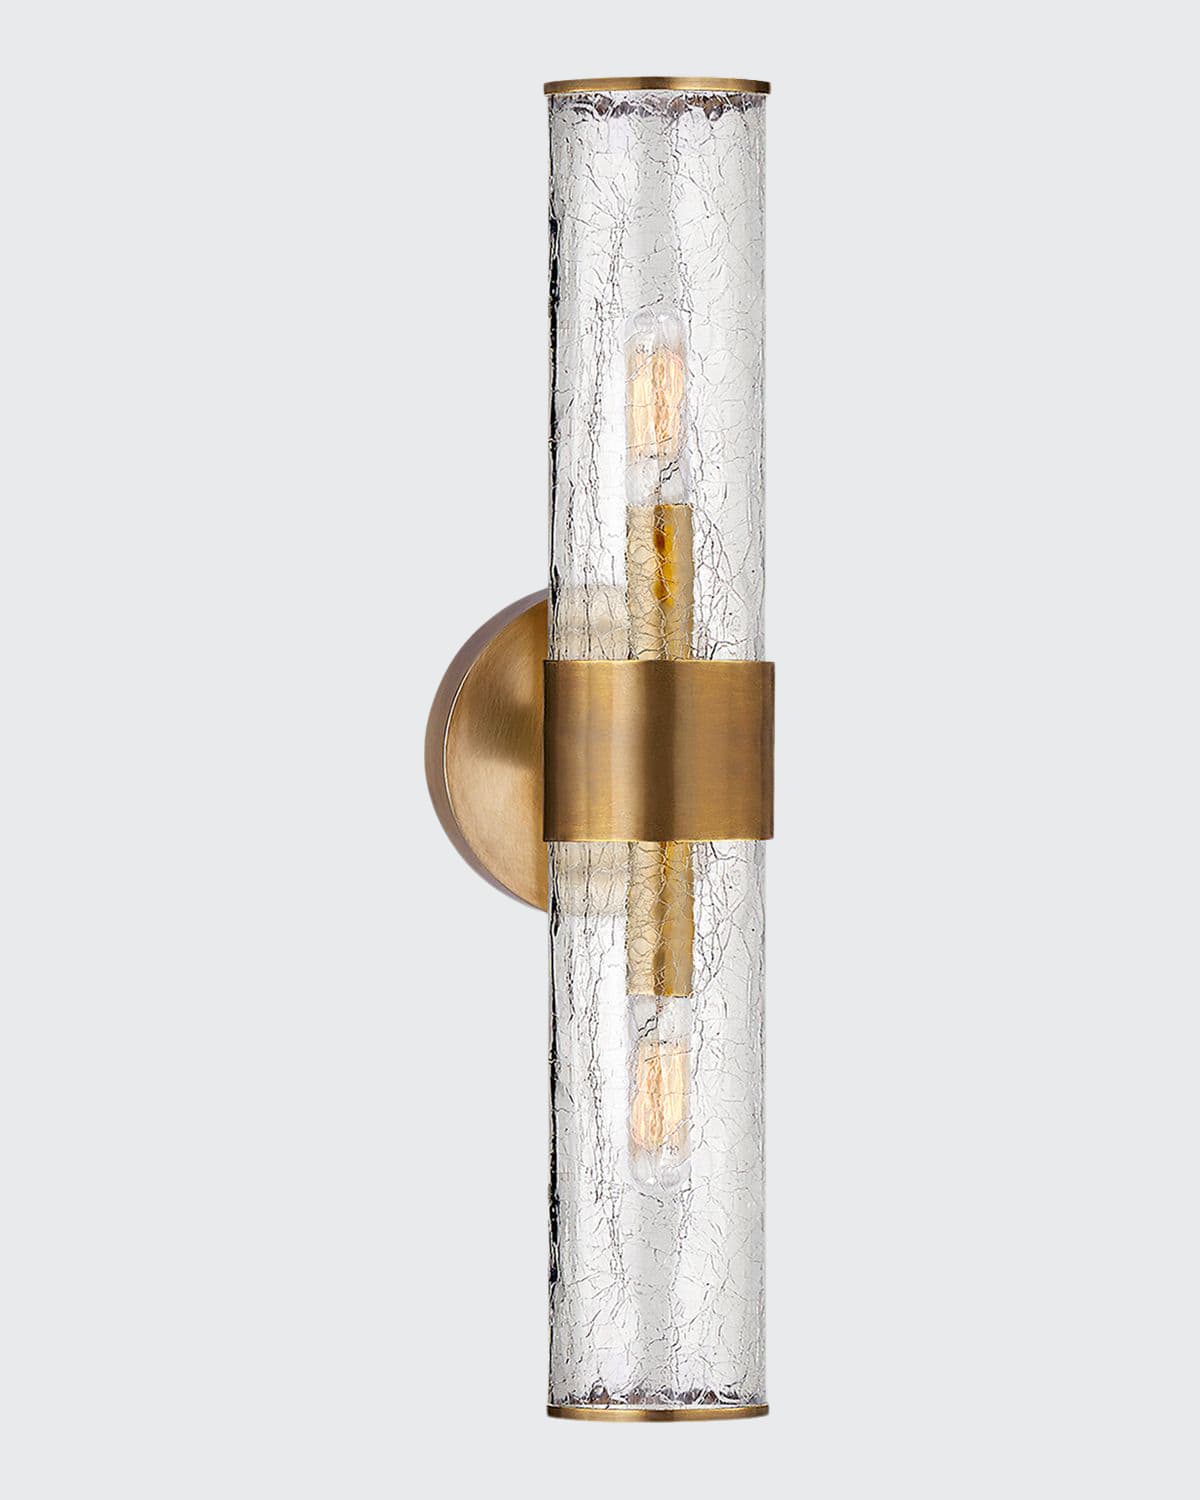 Kelly Wearstler For Visual Comfort Signature Liaison Medium Sconce In Antique Brass